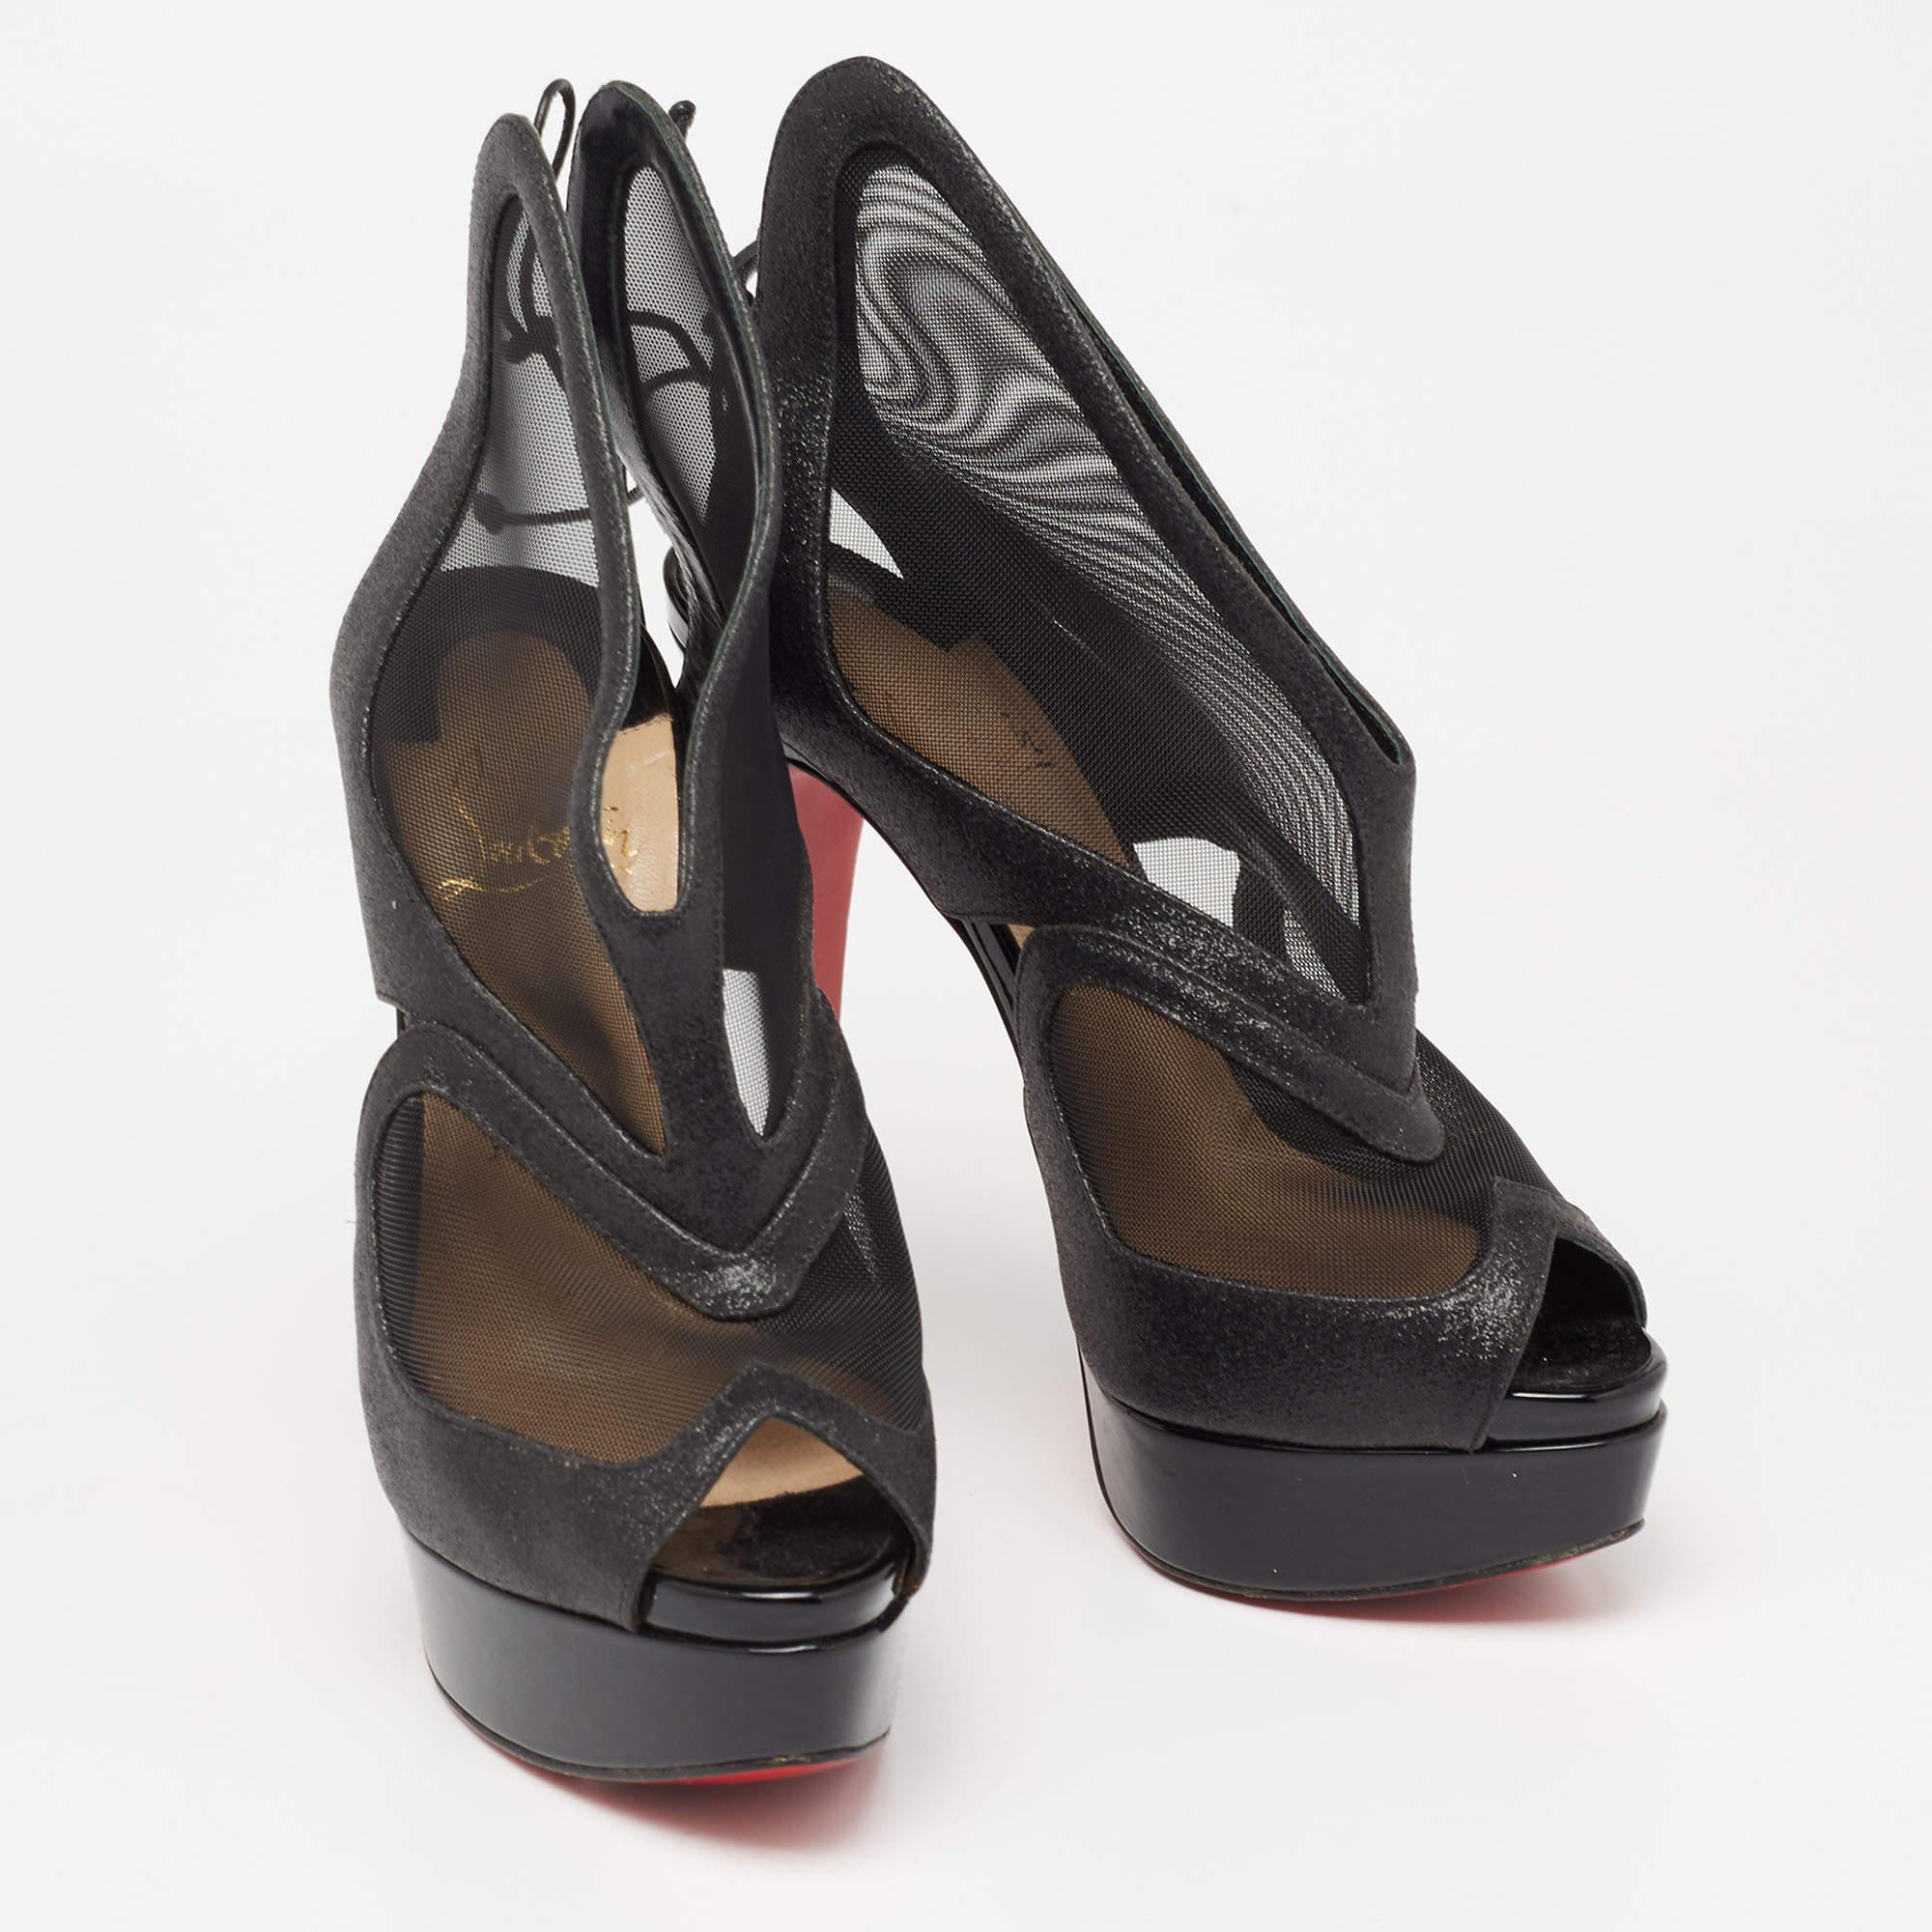 Christian Louboutin Black Glitter and Mesh Farfamesh Ankle Booties Size 36 For Sale 2